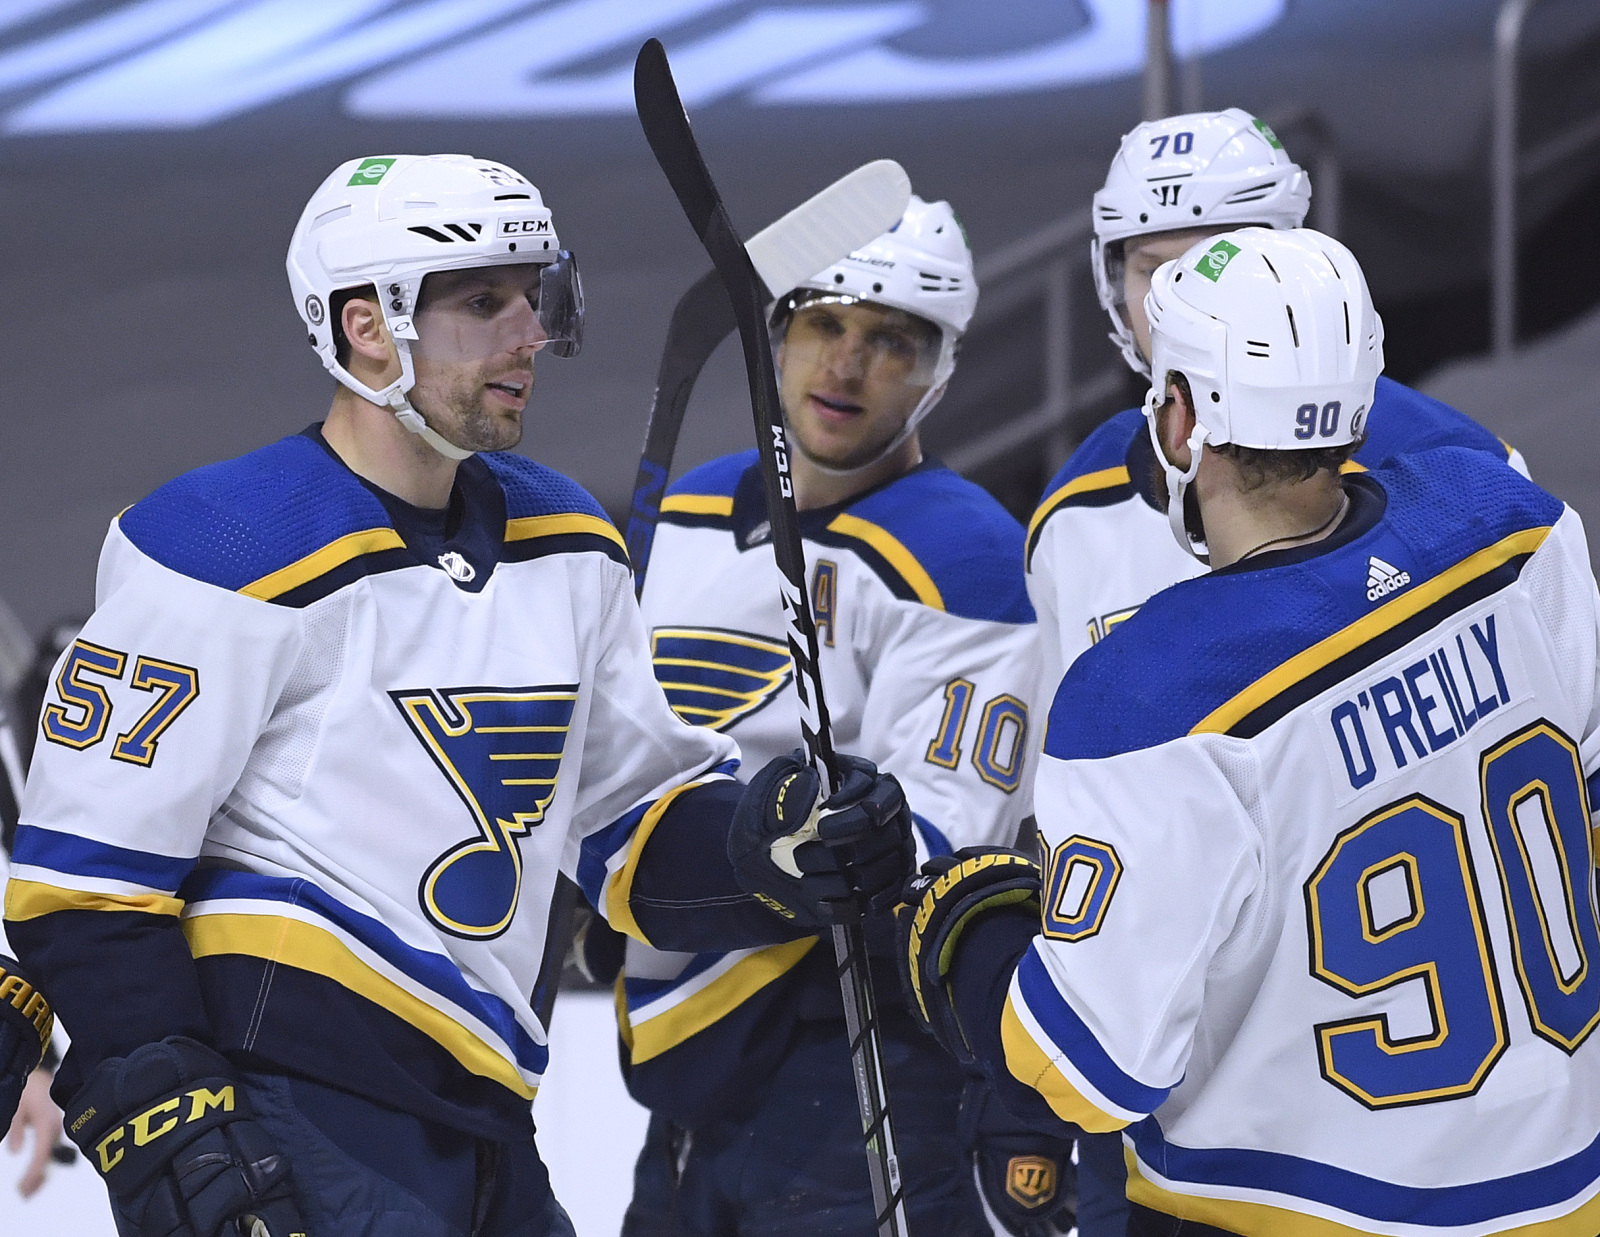 St. Louis Blues Forward Tyler Bozak Out Day-To-Day With Upper Body